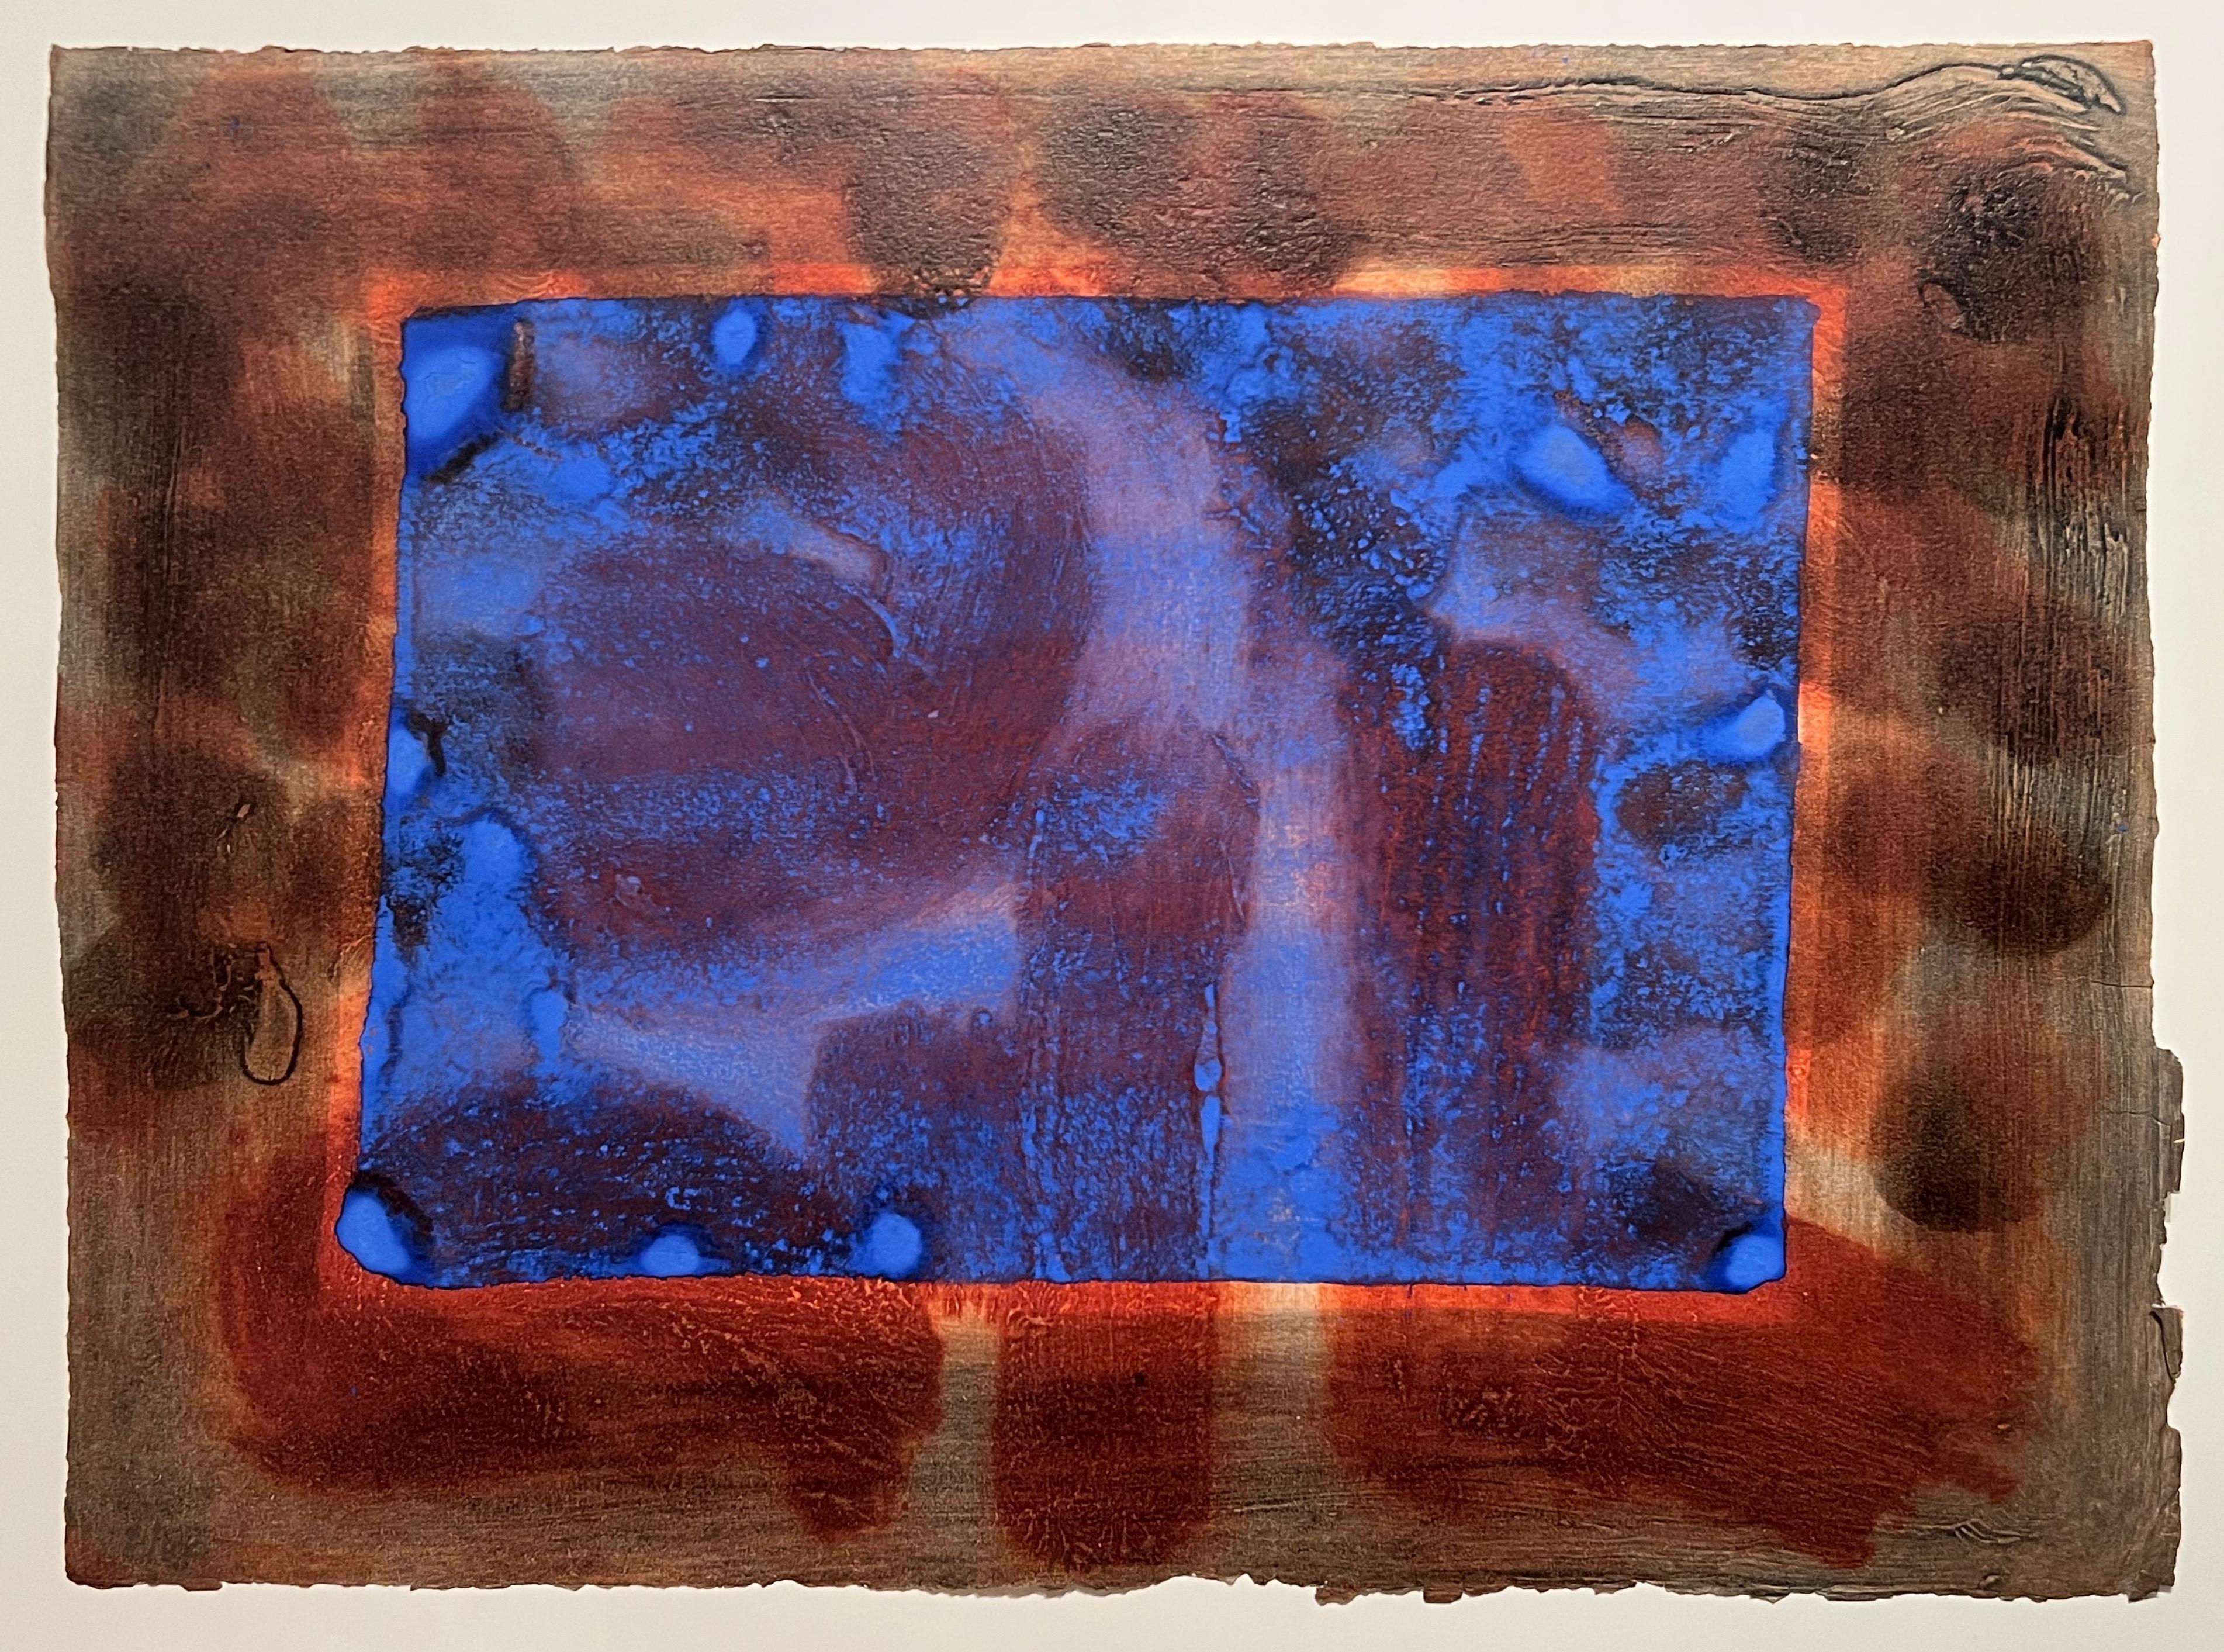 Arguably the greatest colorist of his generation, Howard Hodgkin created the exquisite, Blue Listening Ear in 1986 as a lift-ground etching and aquatint with carborundum and hand-coloring.  Initialed in pencil, dated and numbered, this artwork